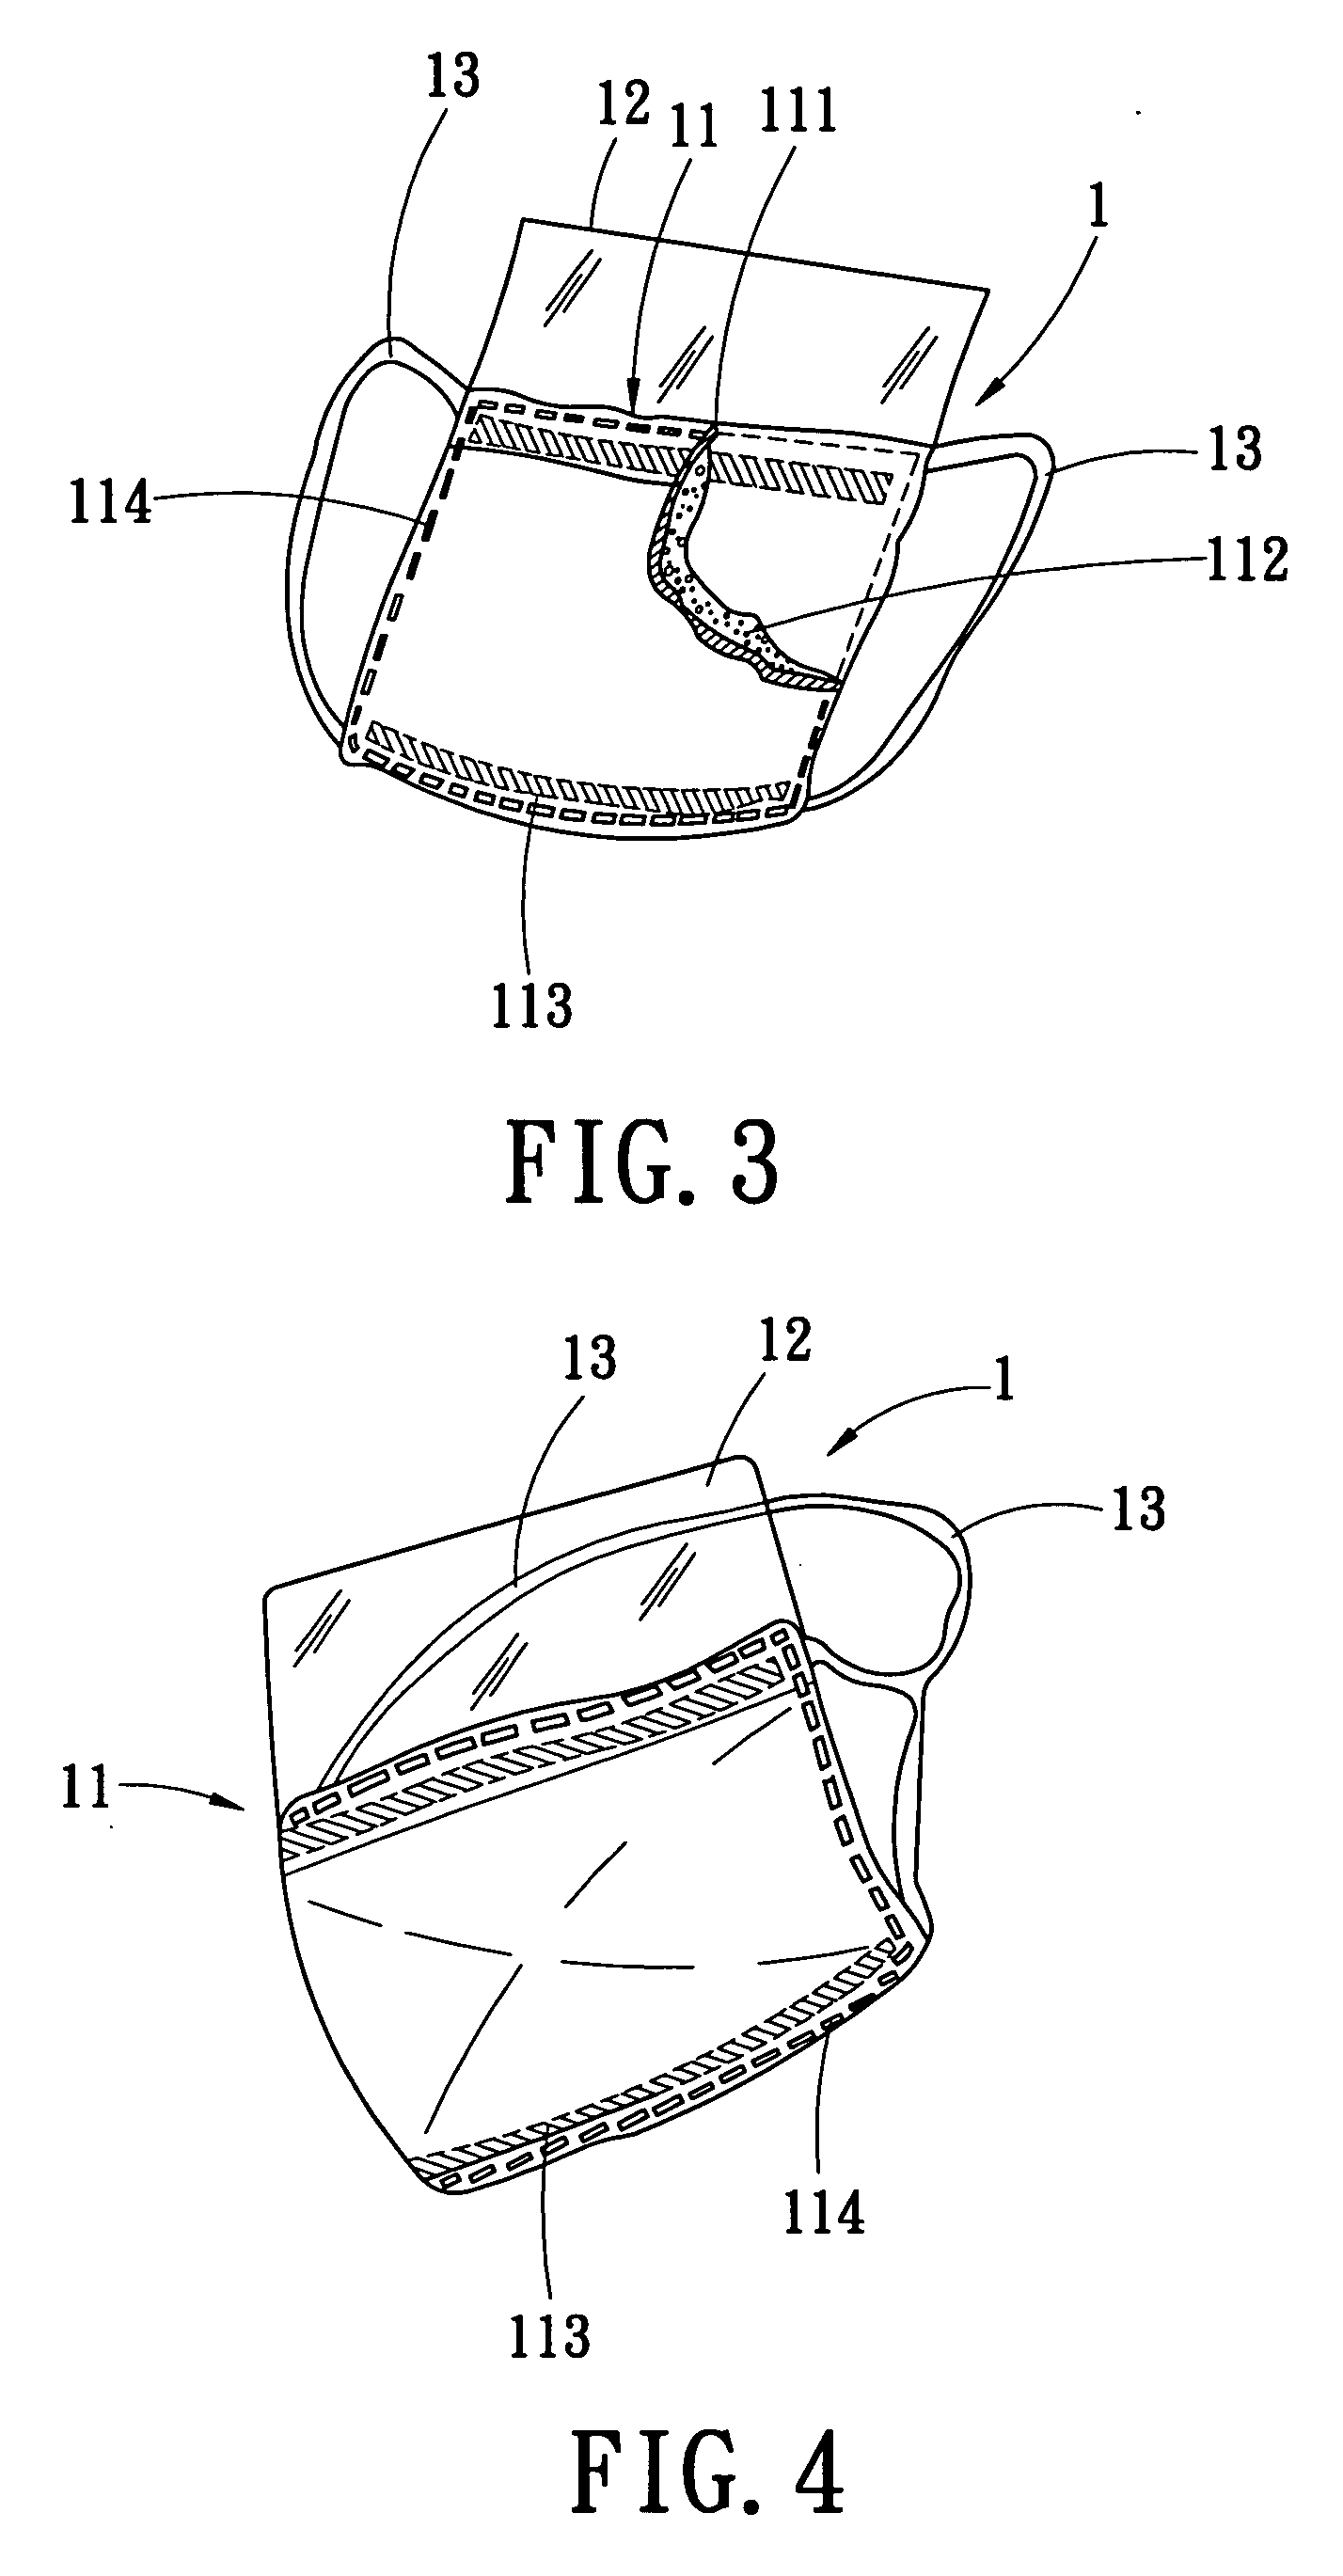 Modified eye and mouth mask structure for escape from dense smoke of fire accident